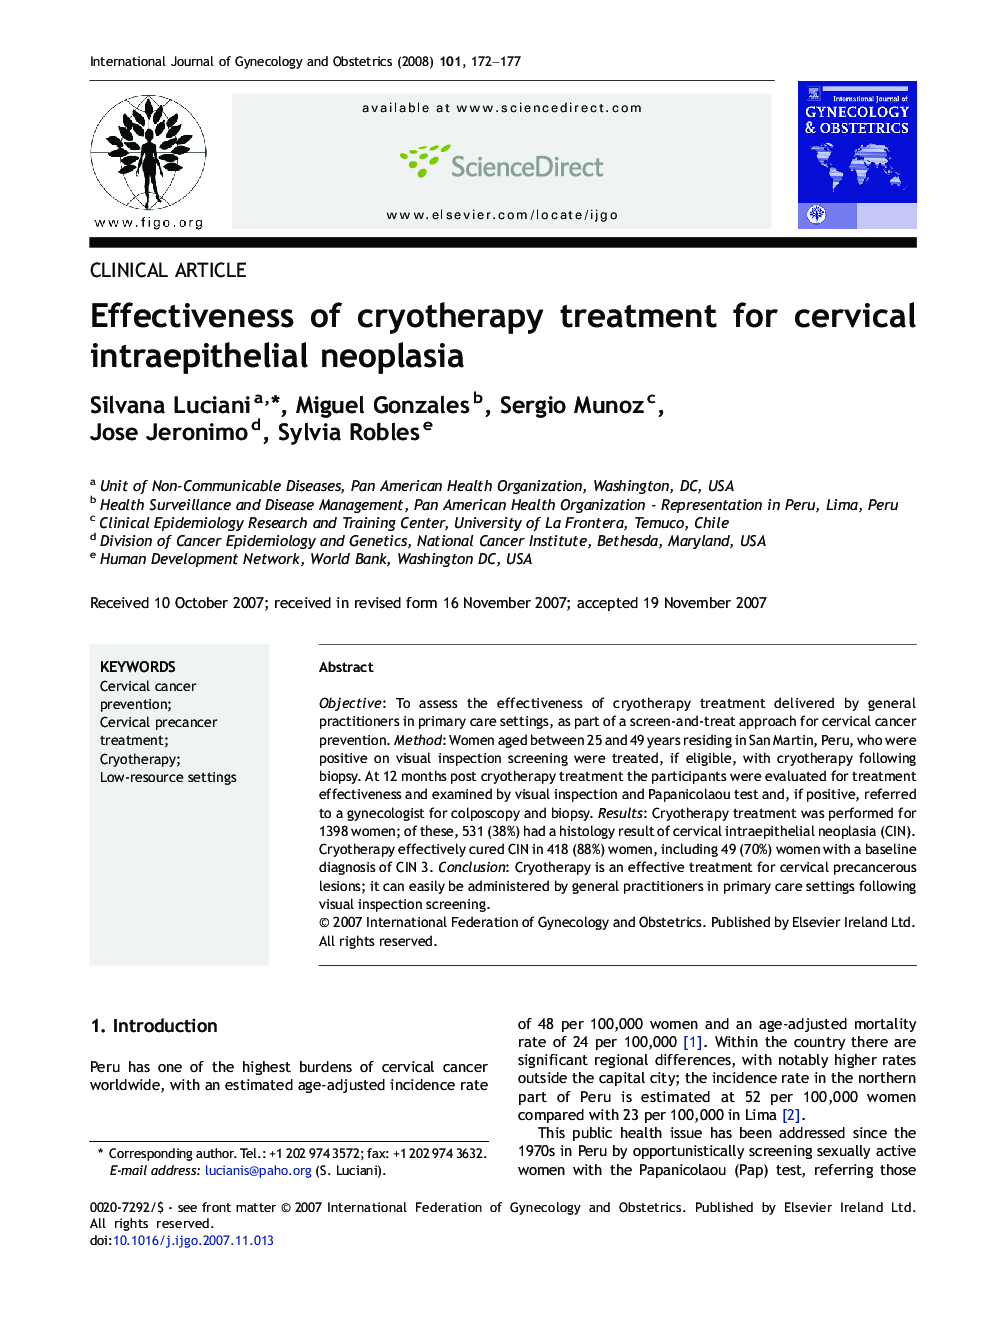 Effectiveness of cryotherapy treatment for cervical intraepithelial neoplasia